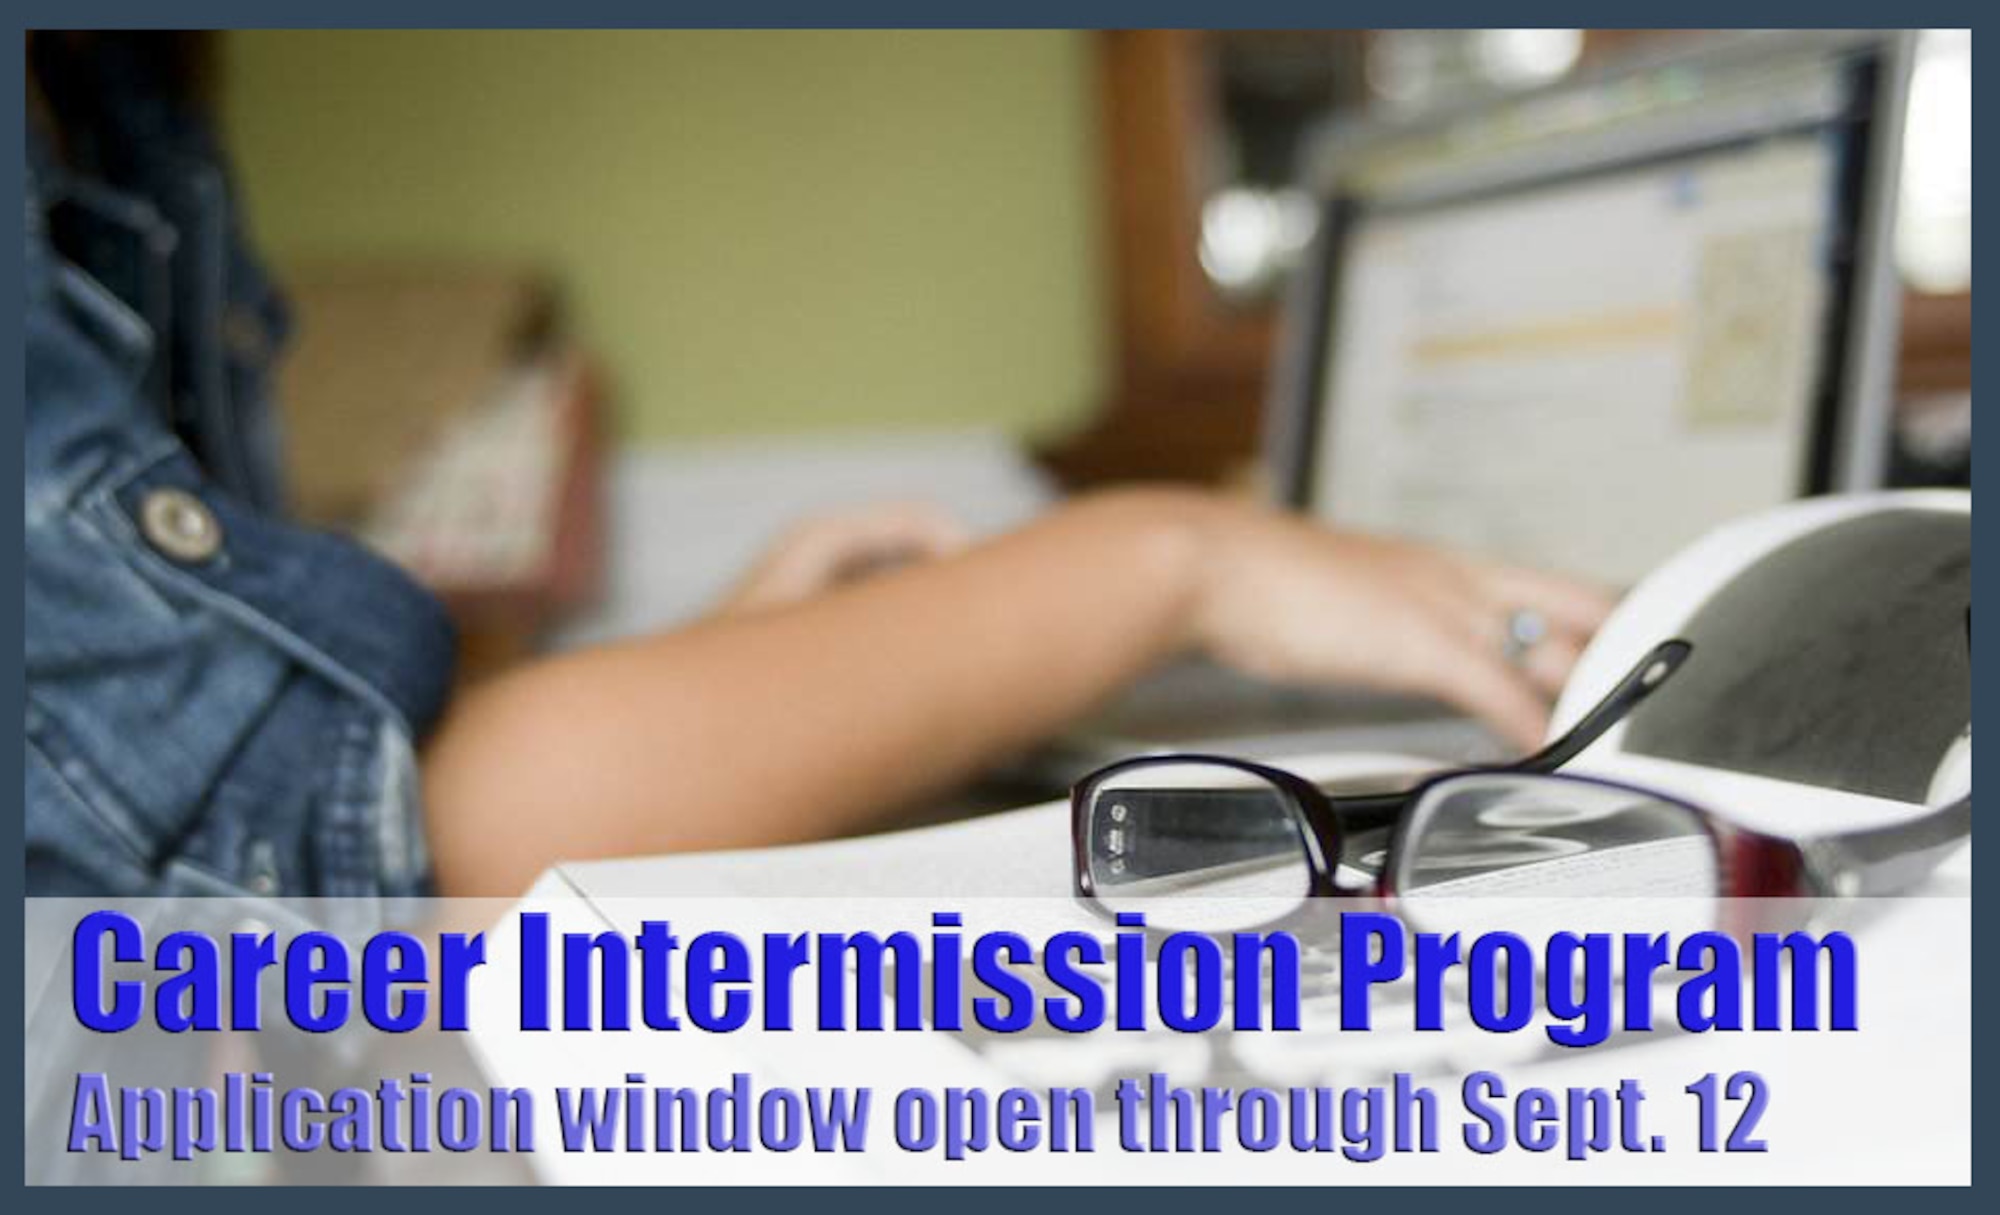 The Air Force Career Intermission Program gives Airmen a one-time temporary transition from active duty to the IRR to meet personal or professional needs outside the service. The application window is open through Sept. 12. (AFPC courtesy graphic)